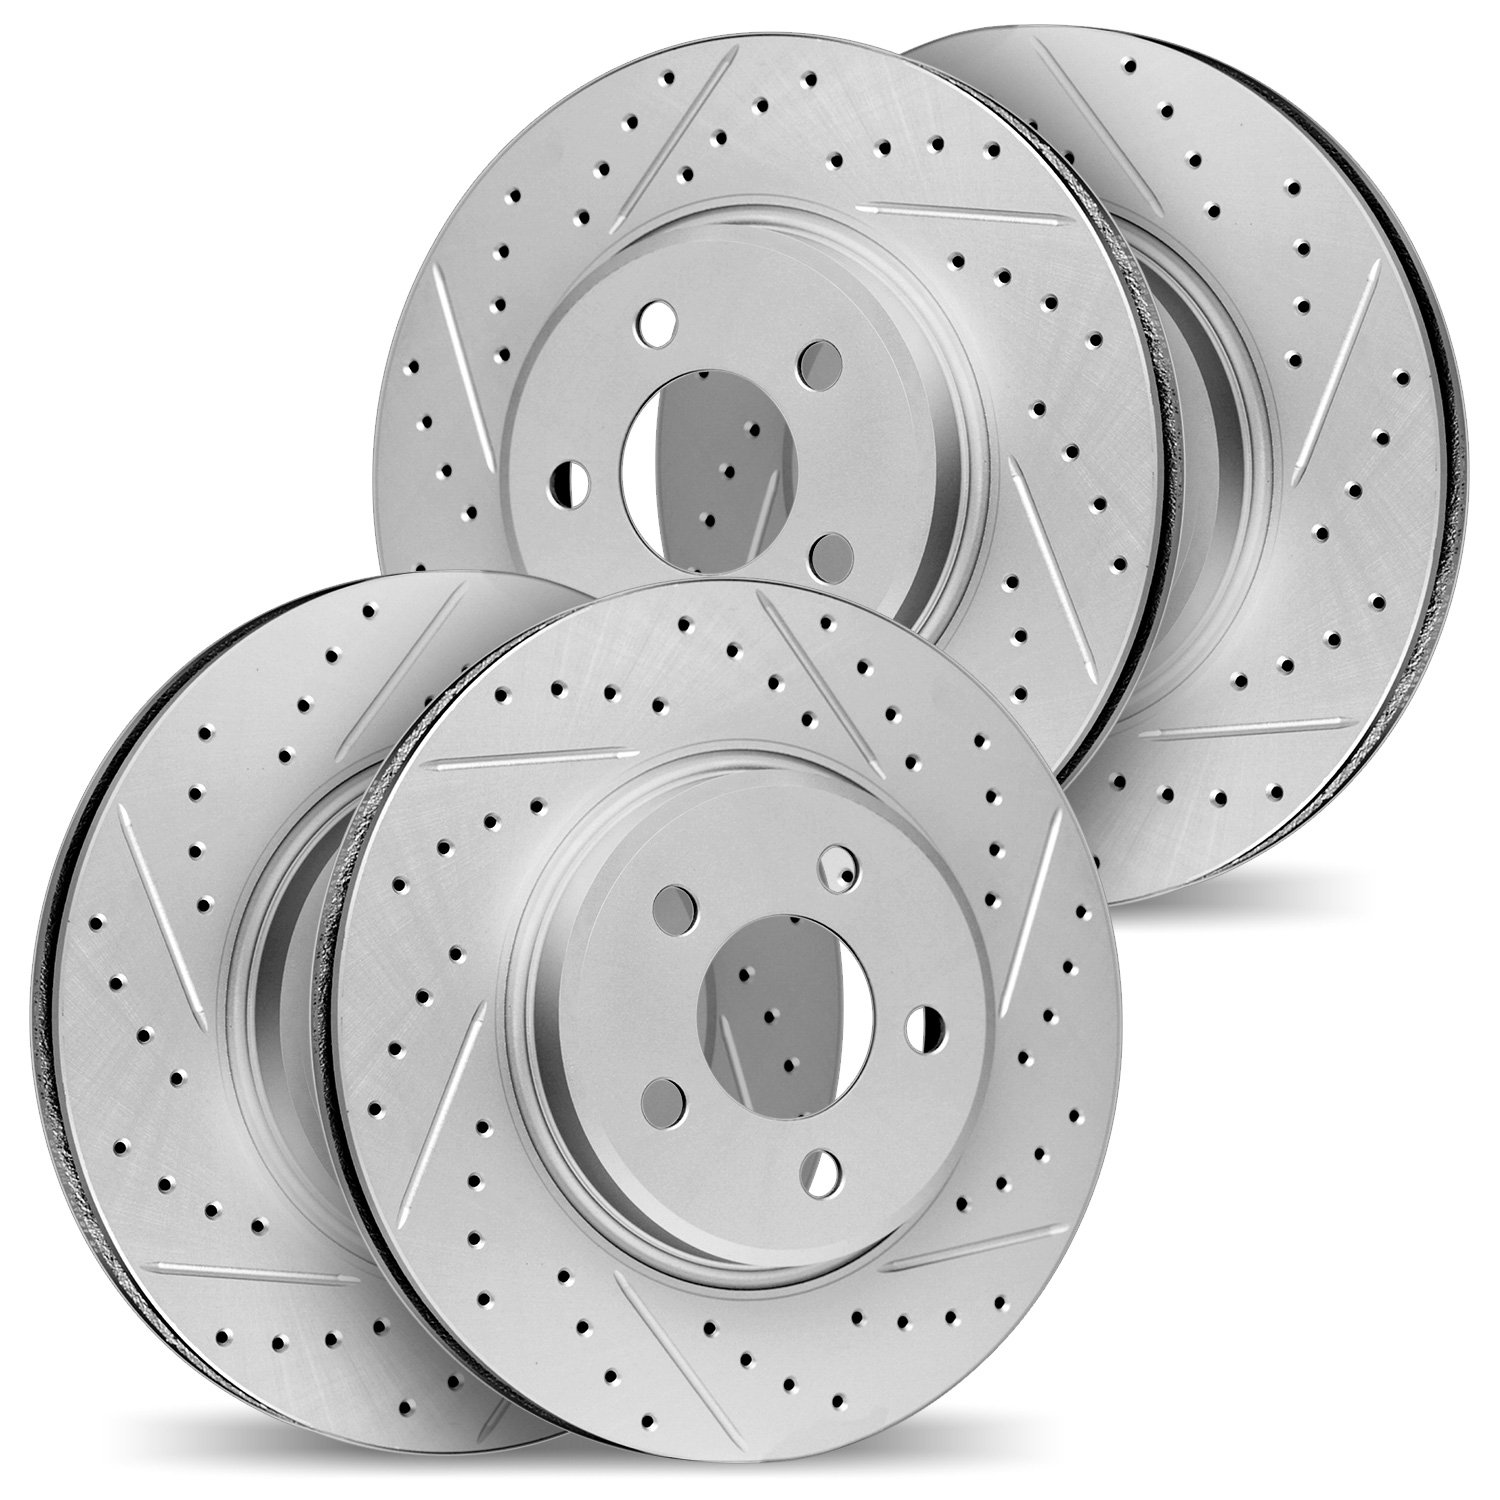 2004-03057 Geoperformance Drilled/Slotted Brake Rotors, Fits Select Kia/Hyundai/Genesis, Position: Front and Rear